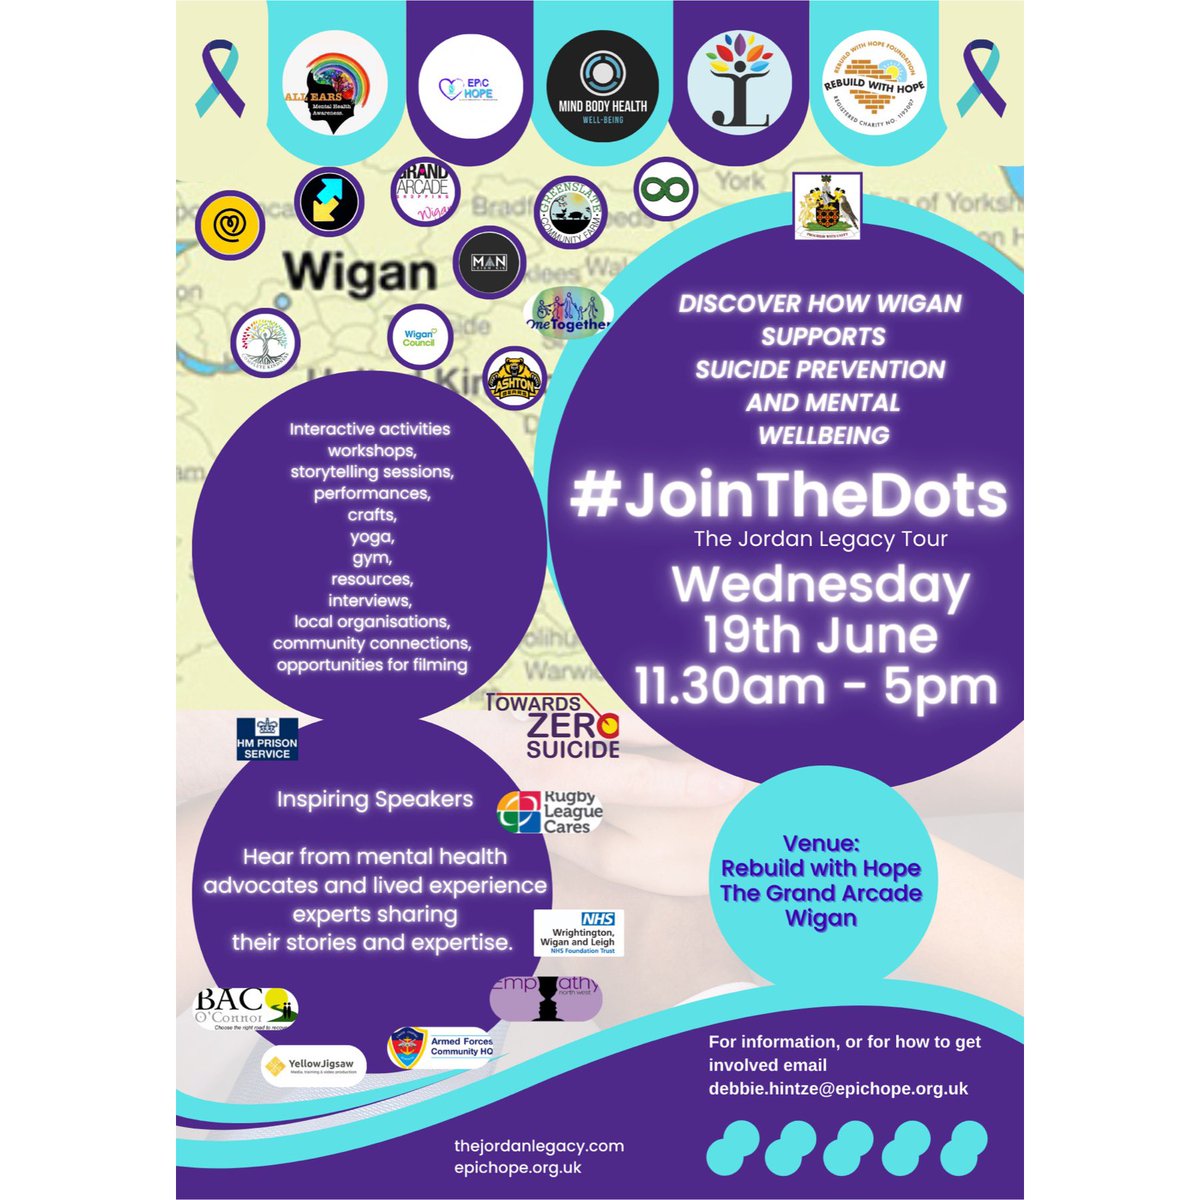 More and more orgs joining us on the Wigan landing point of the #JoinTheDots tour! We have to keep updating the post 😊
Delighted the Mayor will be joining us too. 

@PaulVittles @hopestevep